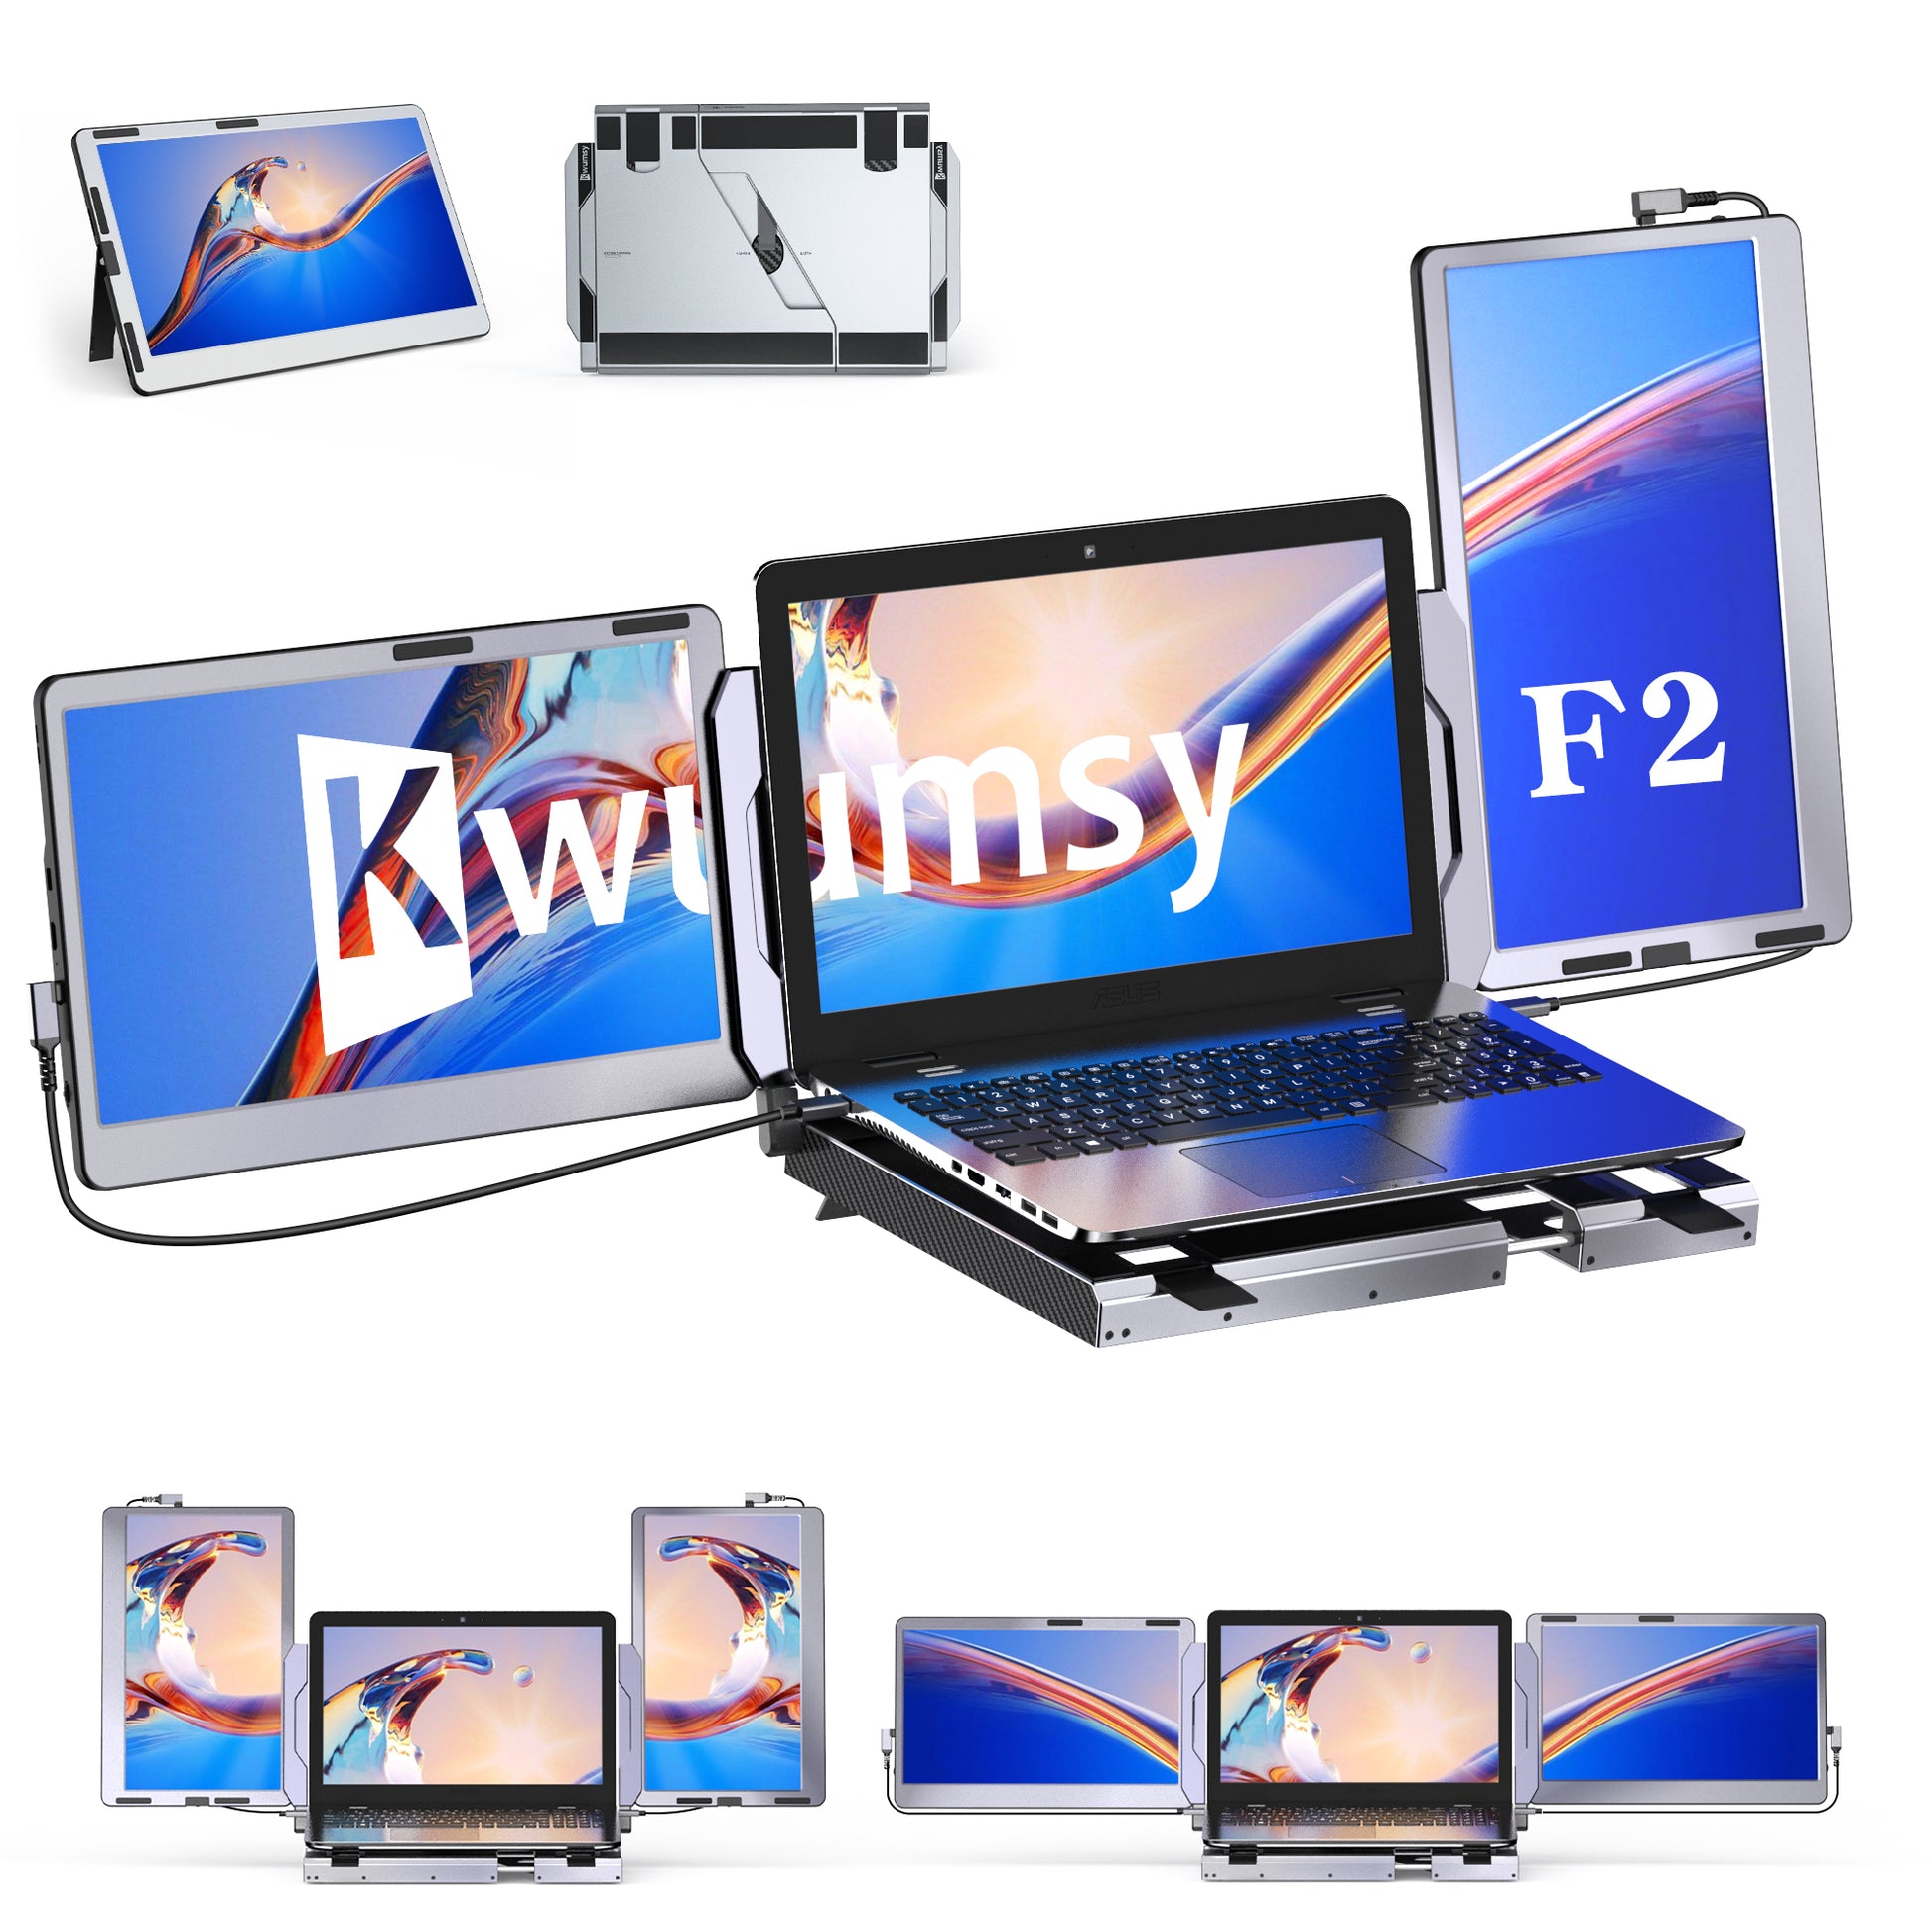 Laptop Triple Kwumsy Monitor F2 Portable 14\'\'